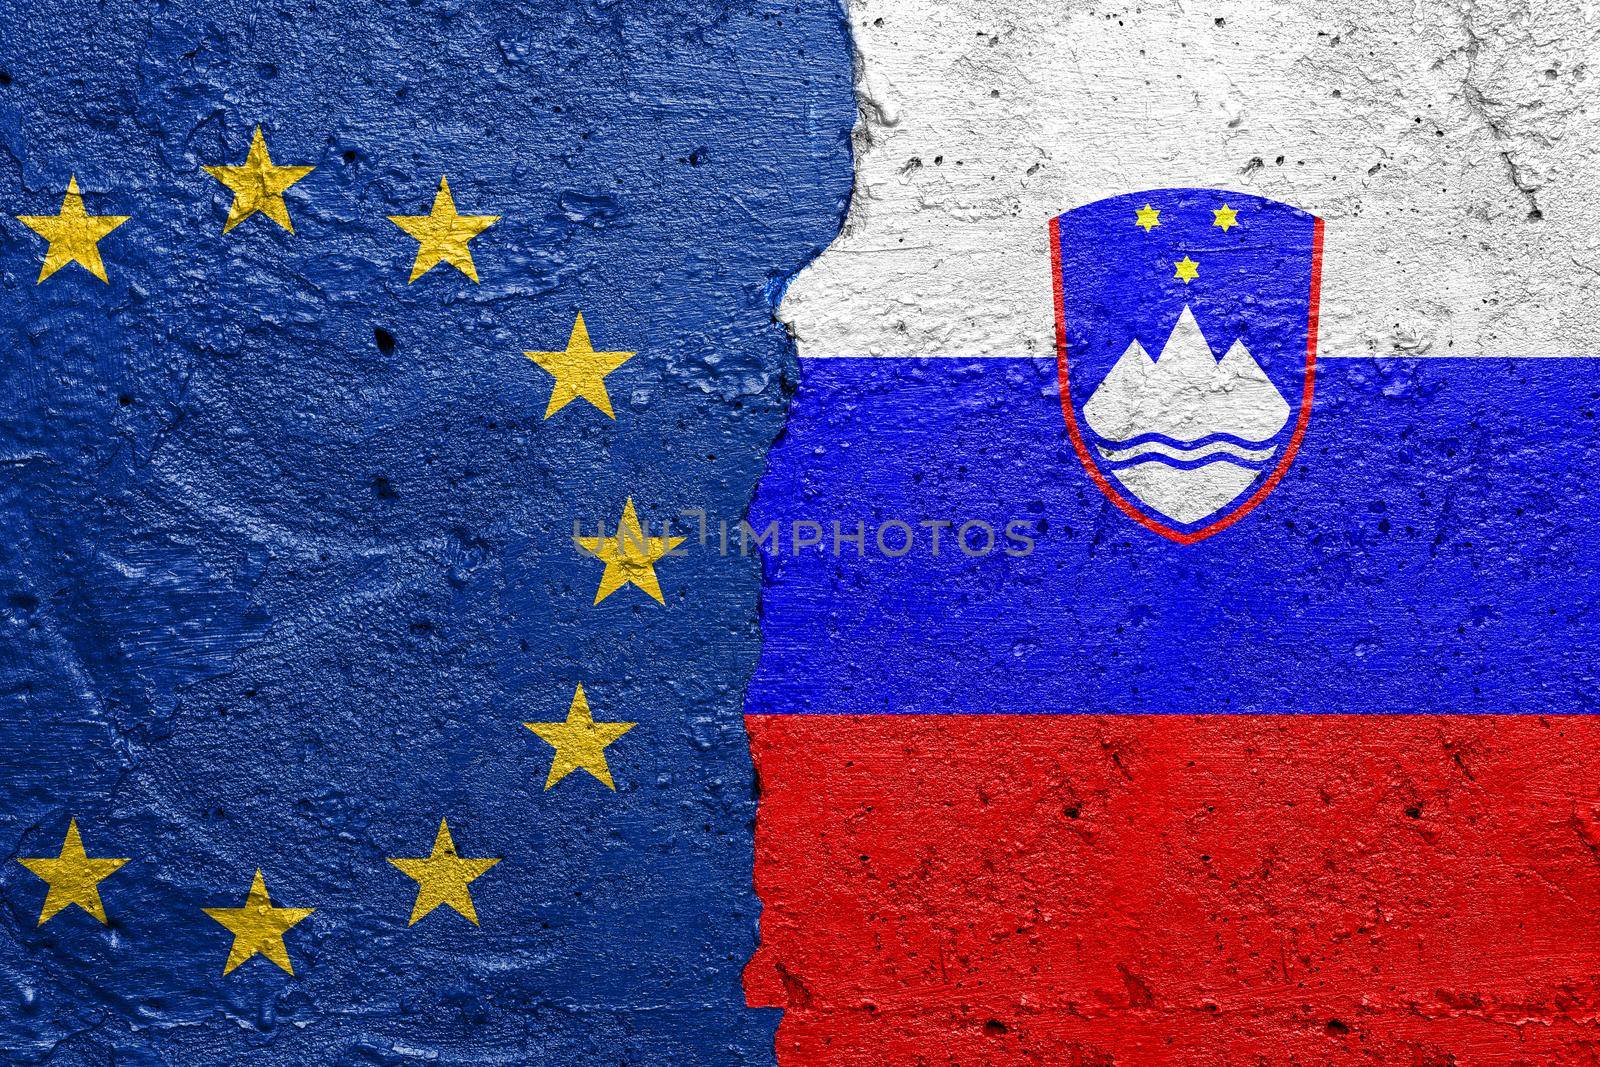 European Union EU and Slovenia - Cracked concrete wall painted with a EU flag on the left and a Slovenian flag on the right